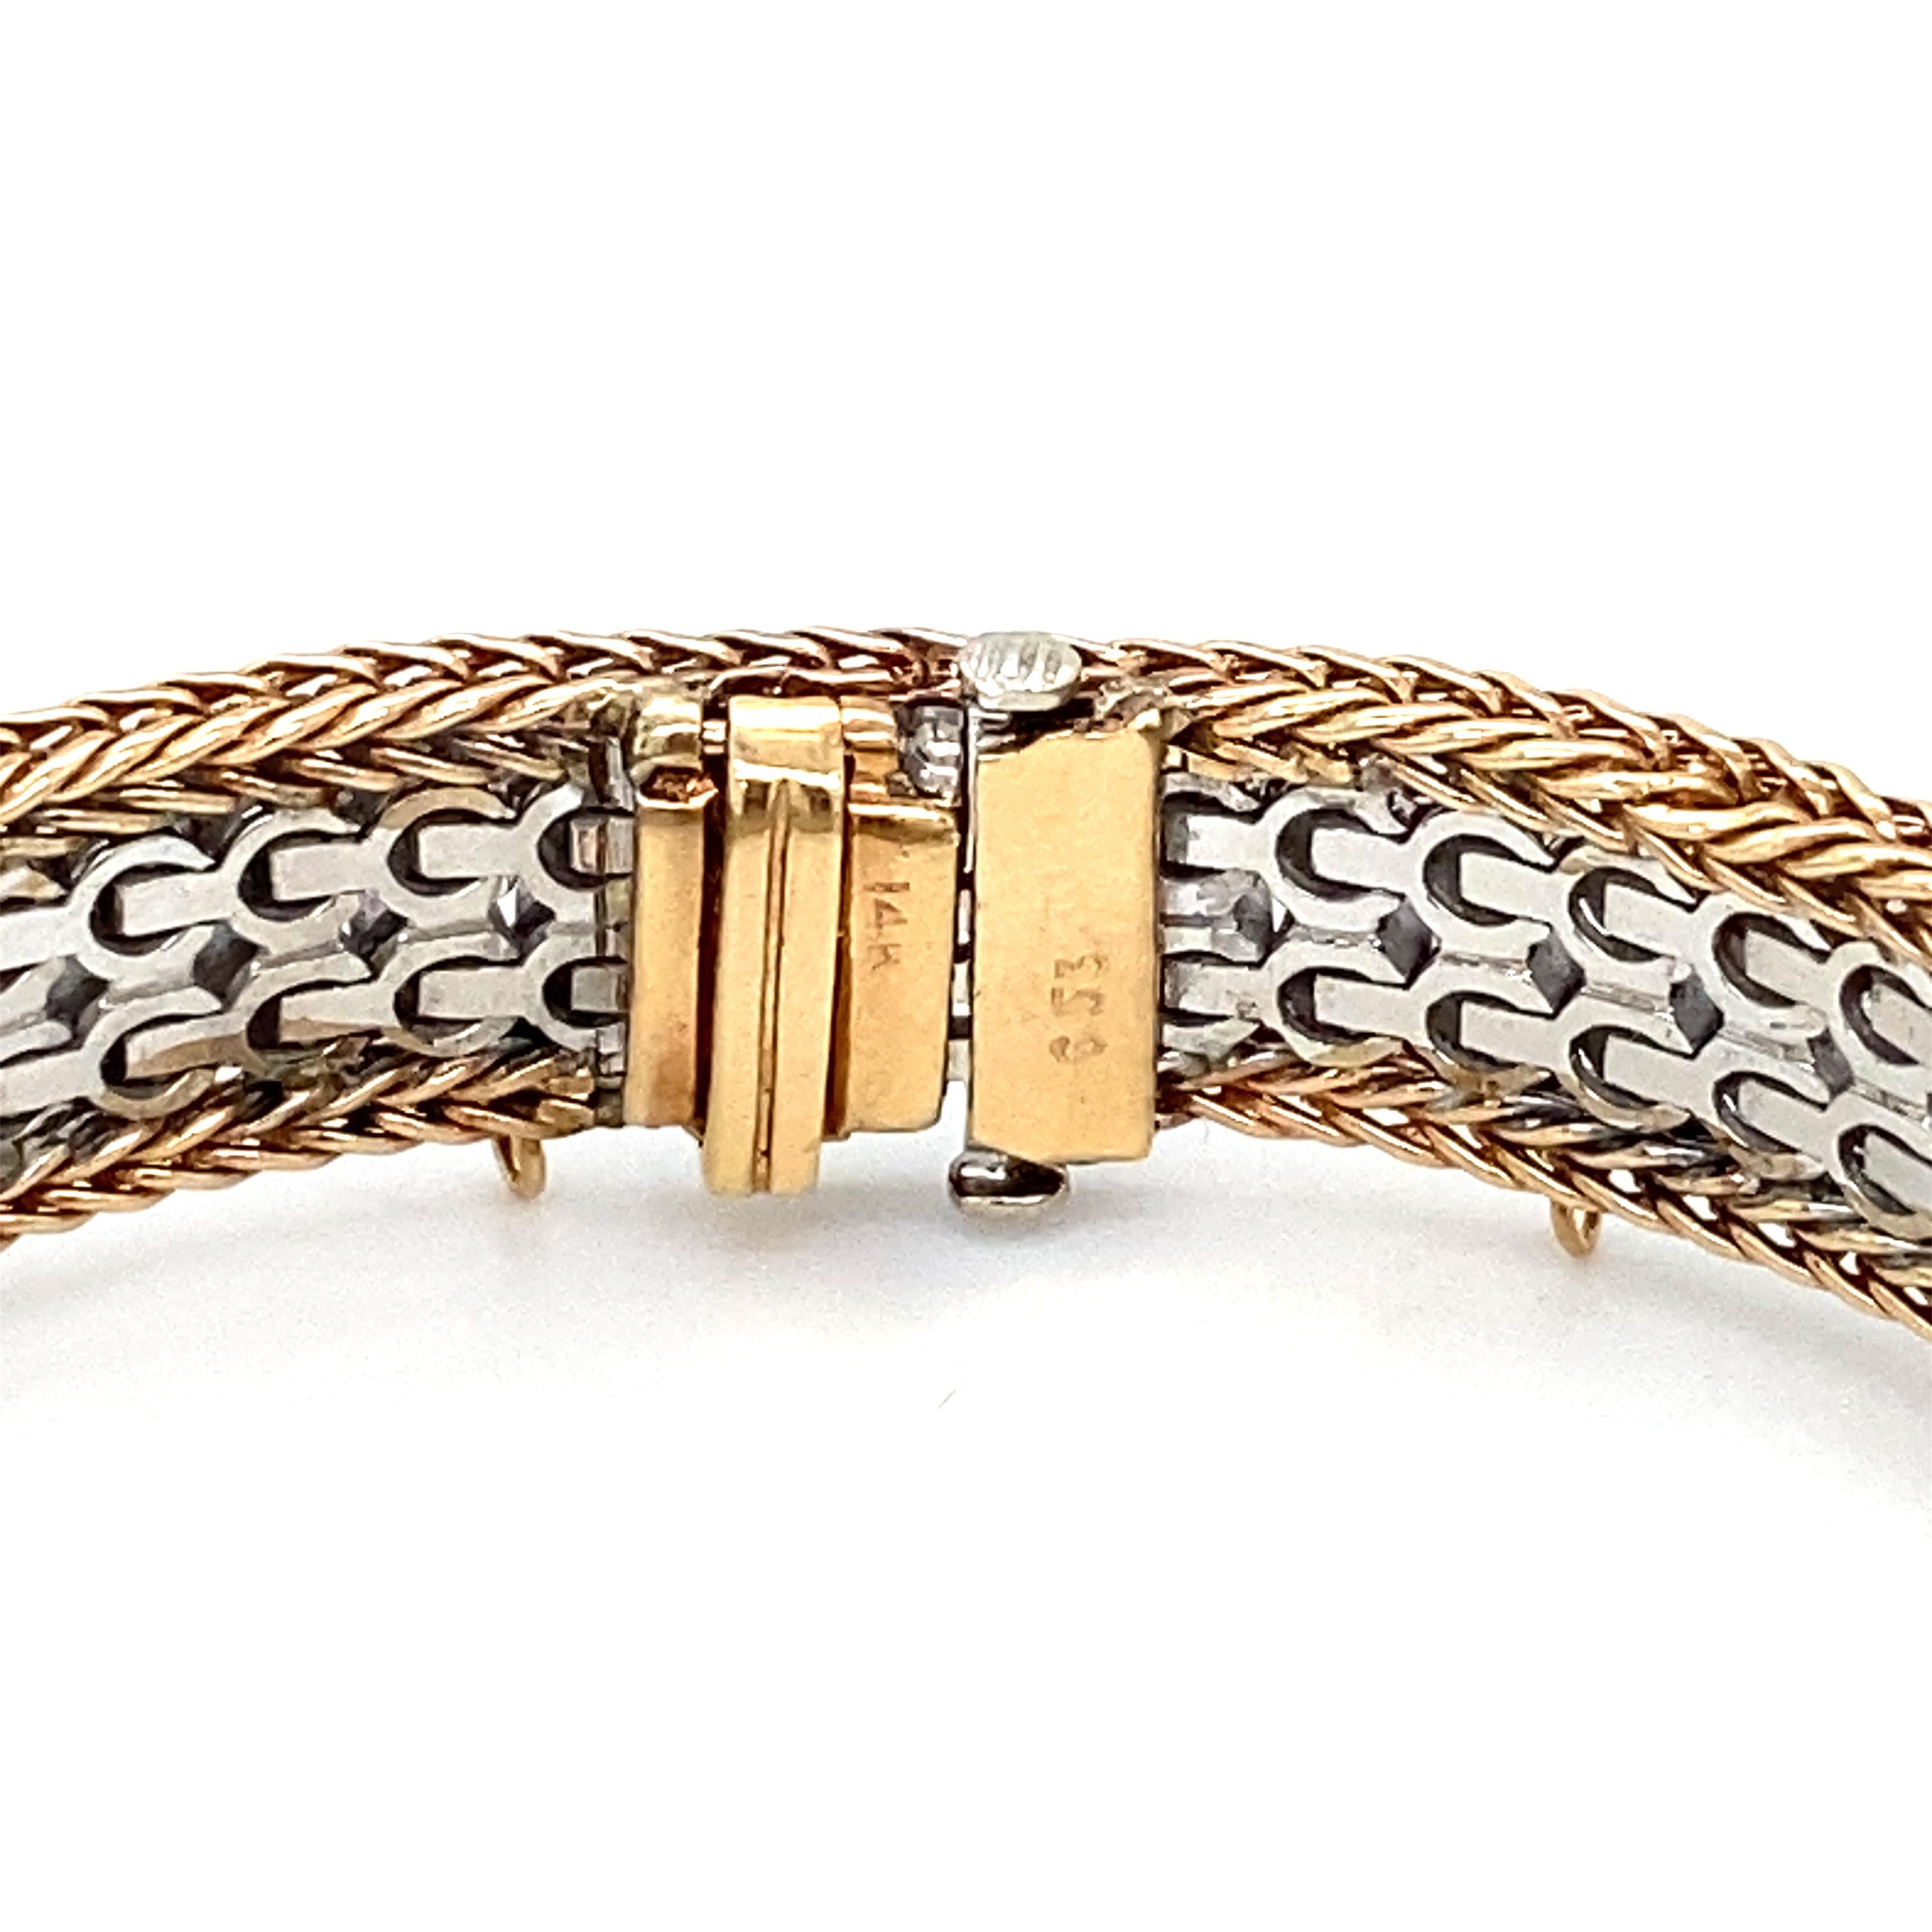 Item Details: This tennis bracelet features a braided basket weave border of 14k gold and a center double row of brilliant round diamonds.

Circa: 2000s
Metal Type: 14 Karat Gold
Weight: 34.5 grams 
Size: 6.75 inch length 

Diamond Details:

Carat: